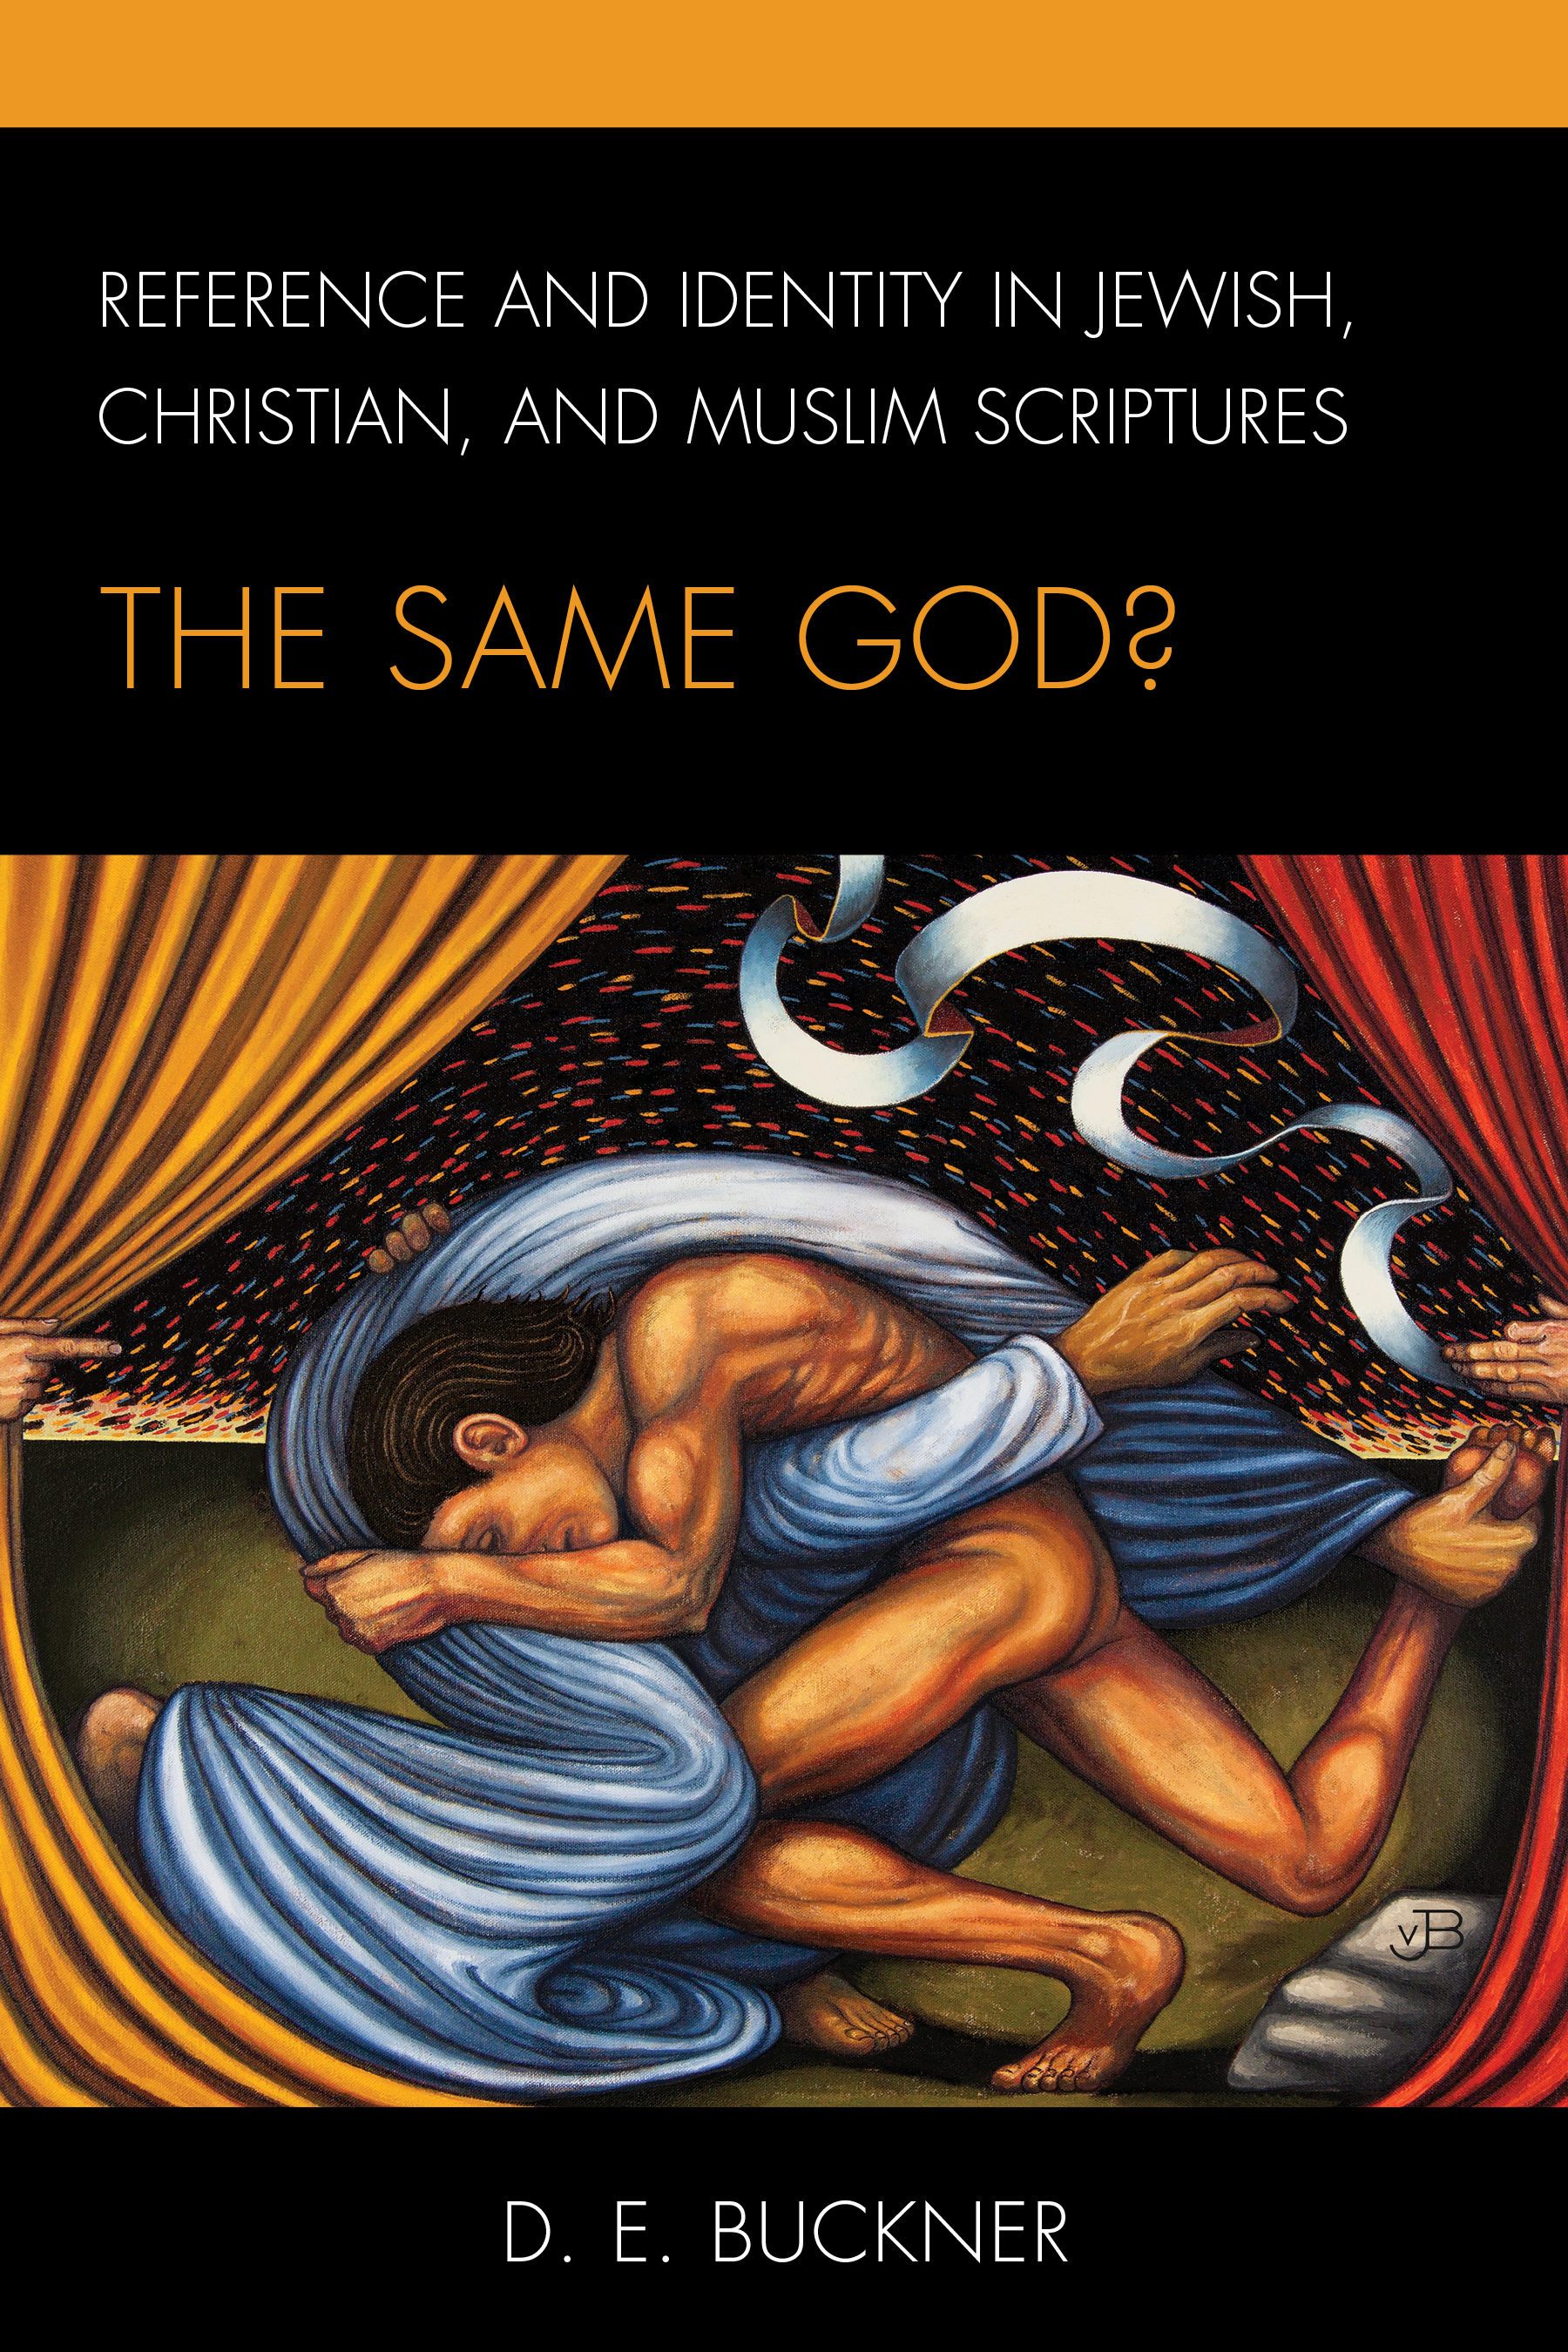 Reference and Identity in Jewish, Christian, and Muslim Scriptures: The Same God?